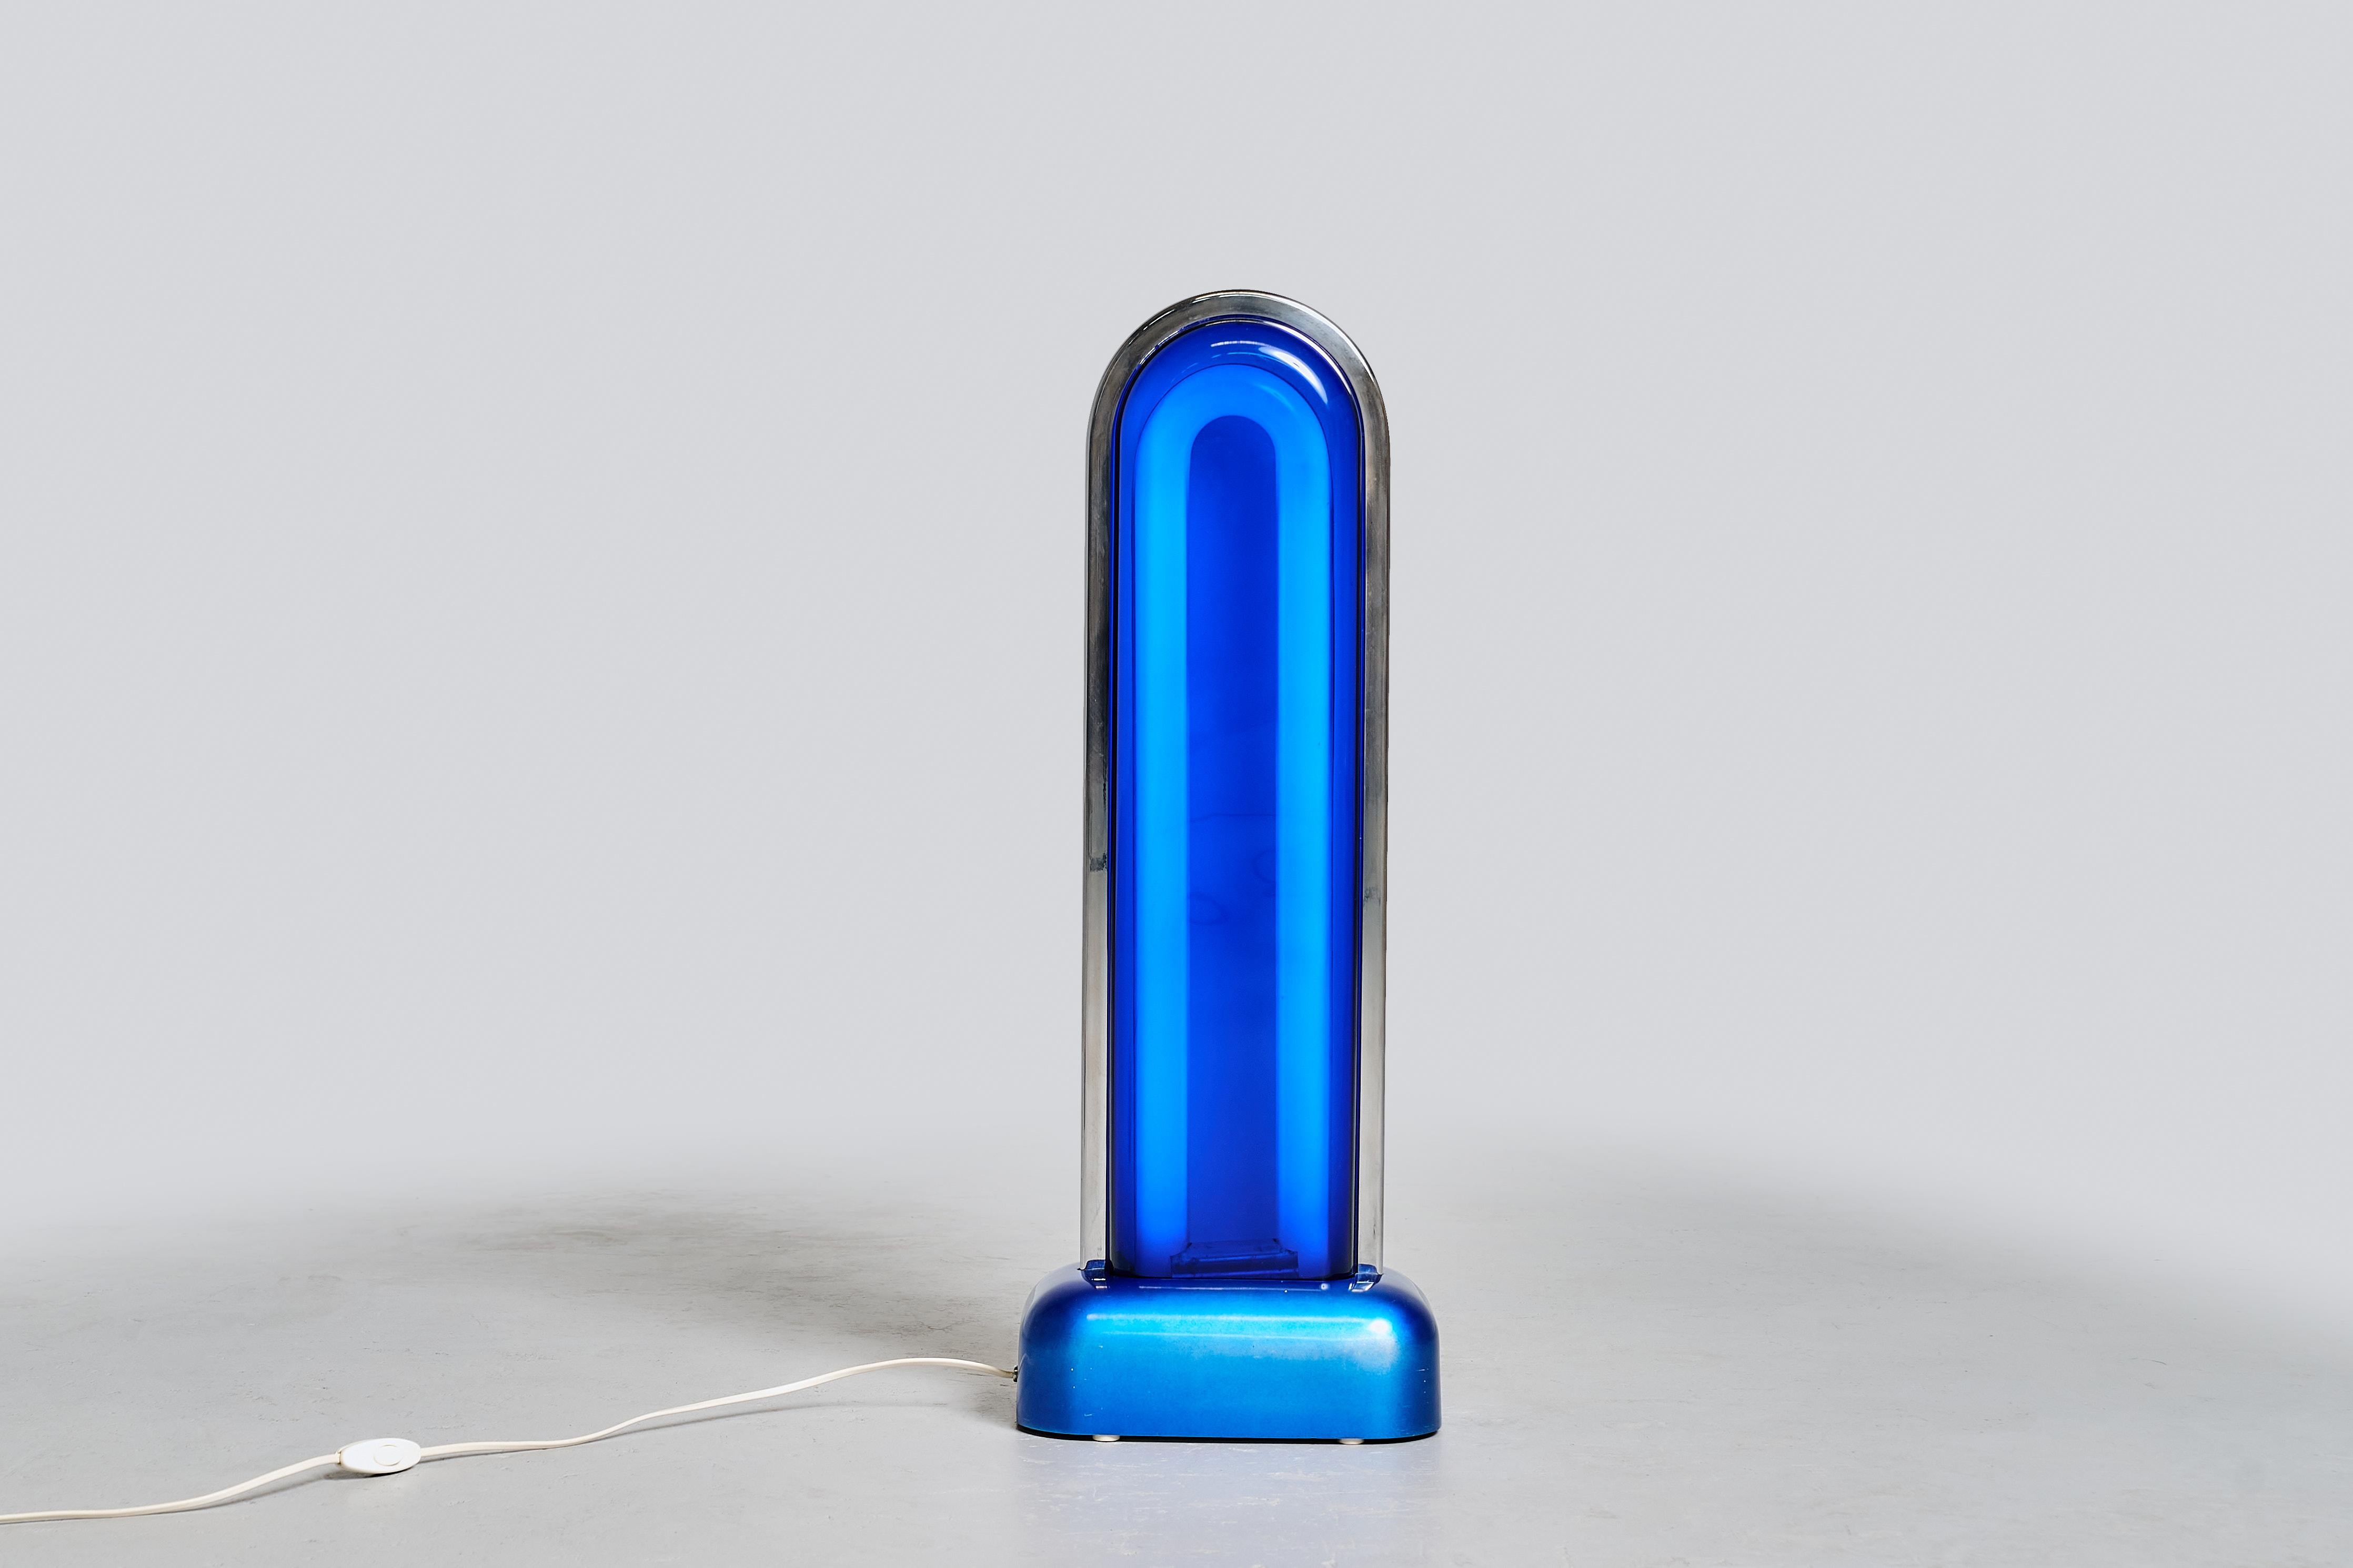 The Asteroid Lamp is indeed a remarkable piece of design created by Ettore Sottsass in 1968. Ettore Sottsass was a prominent Italian designer and architect known for his innovative and influential work in the world of design. The Asteroid Lamp is a